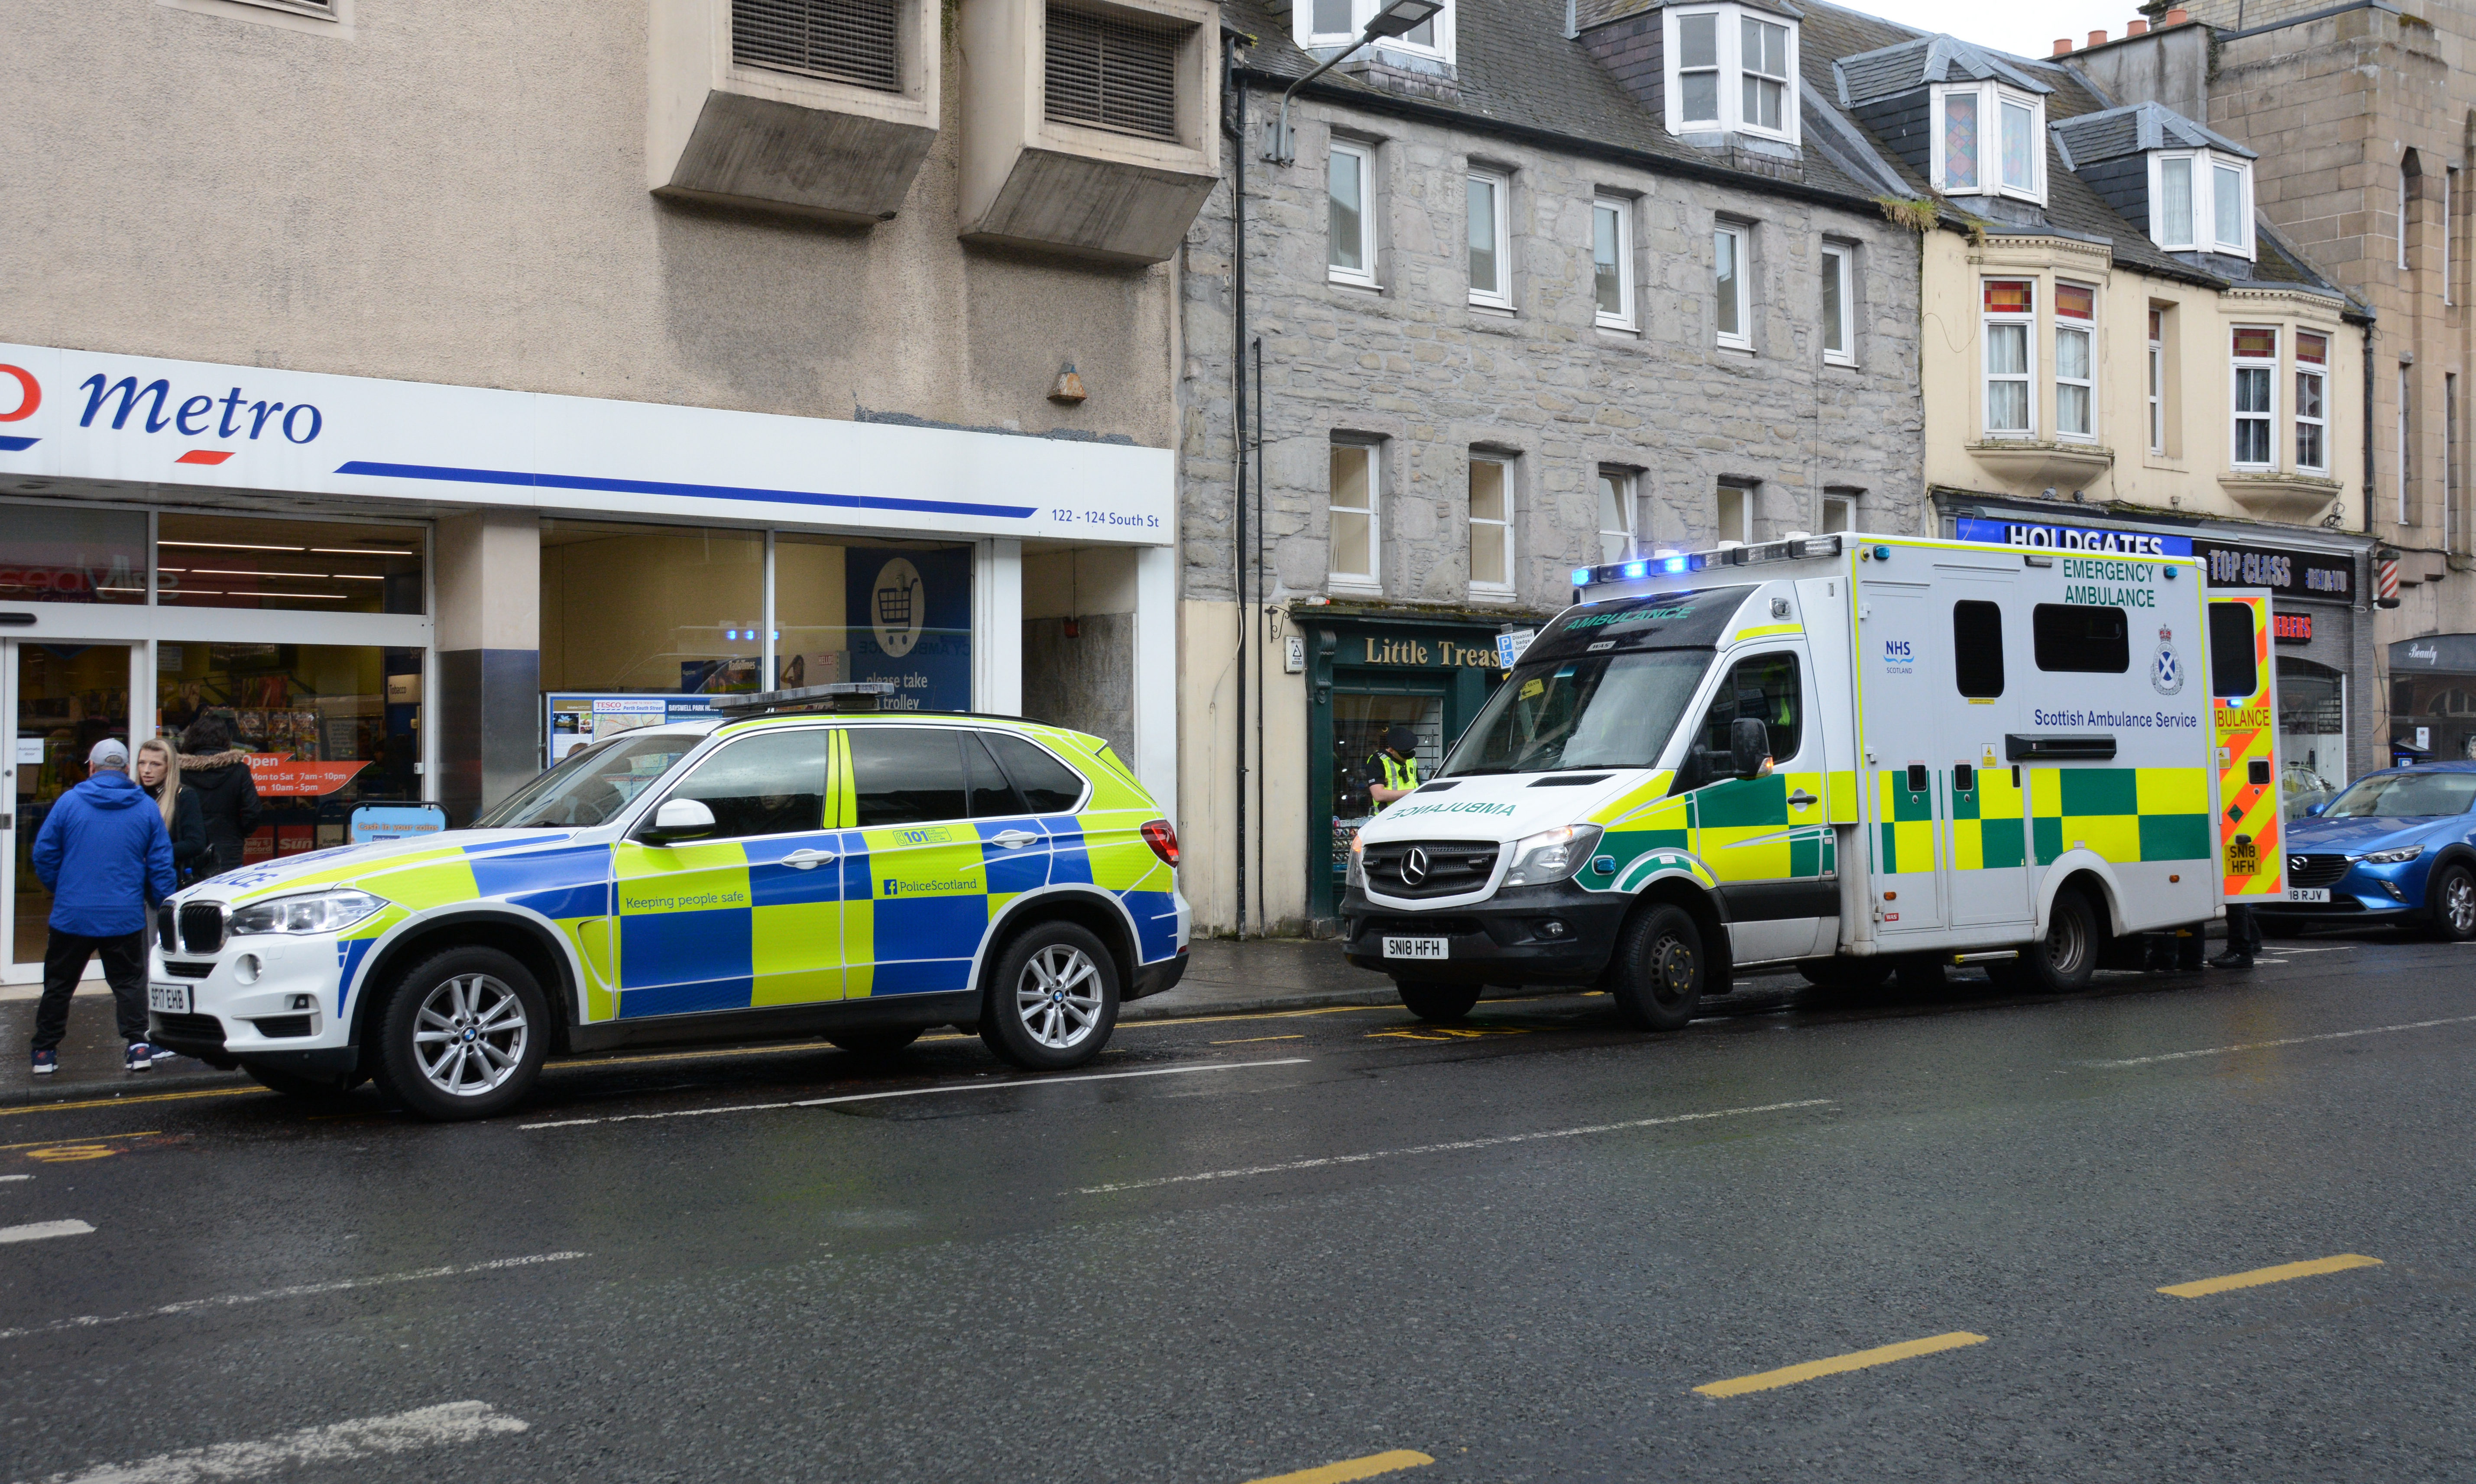 Emergency services attend scene on South Street in Perth